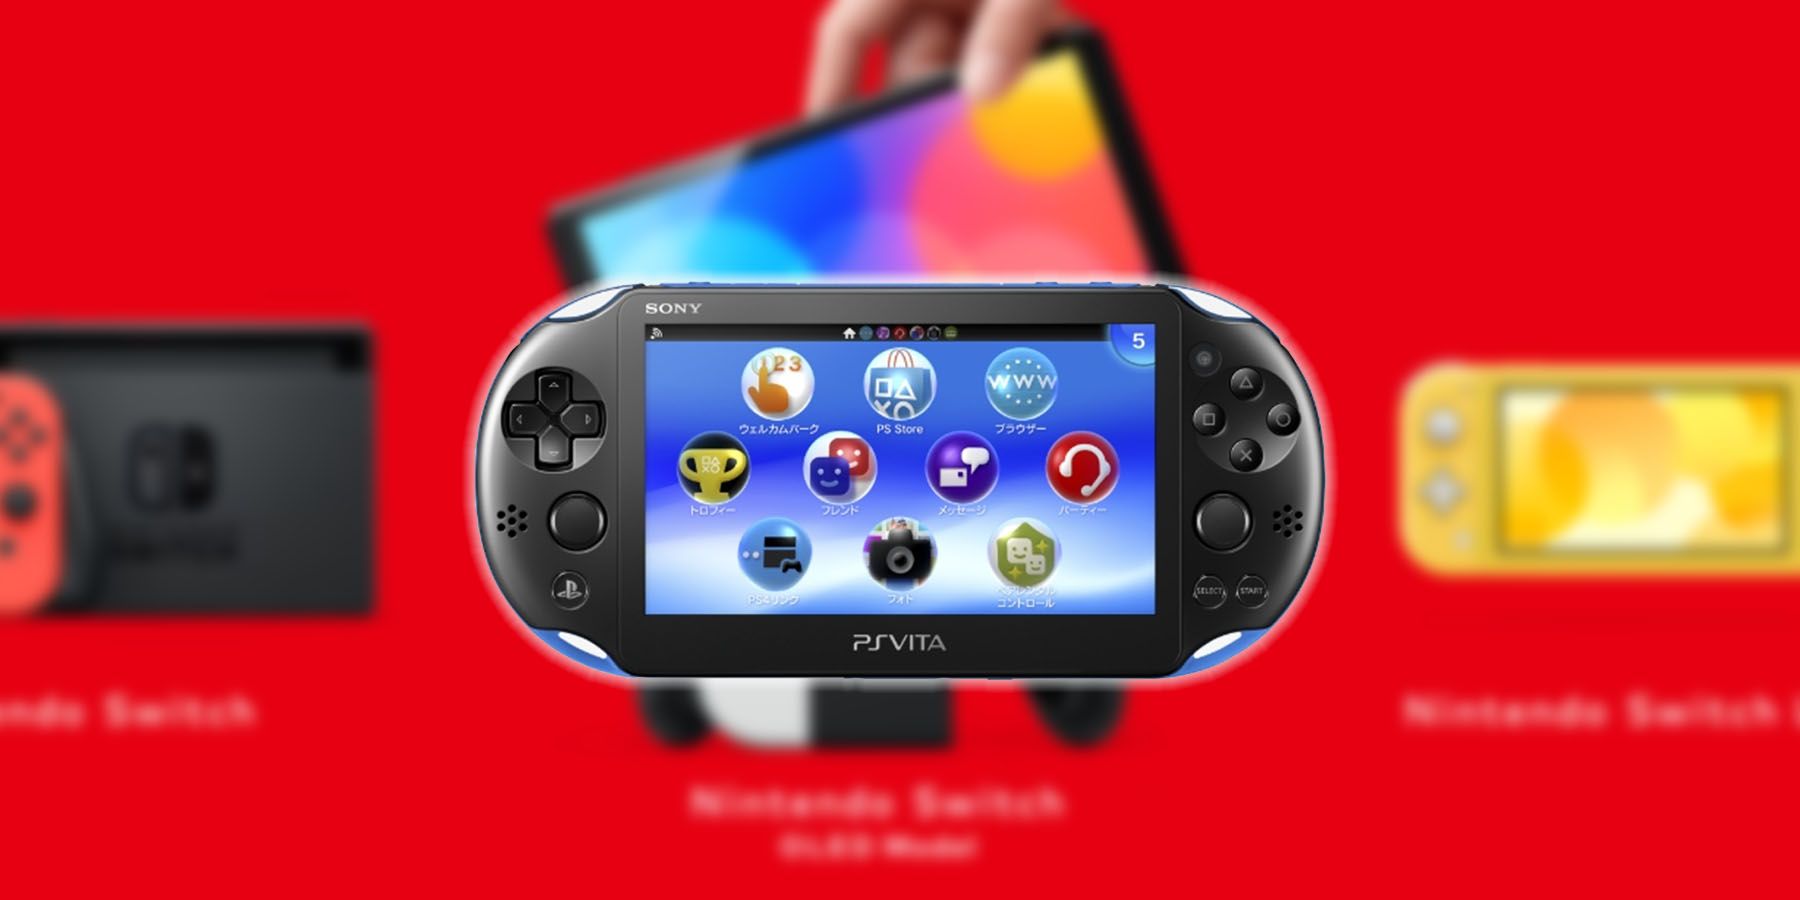 Video Claims That A Tool Can Get PlayStation Vita Apps Running on 